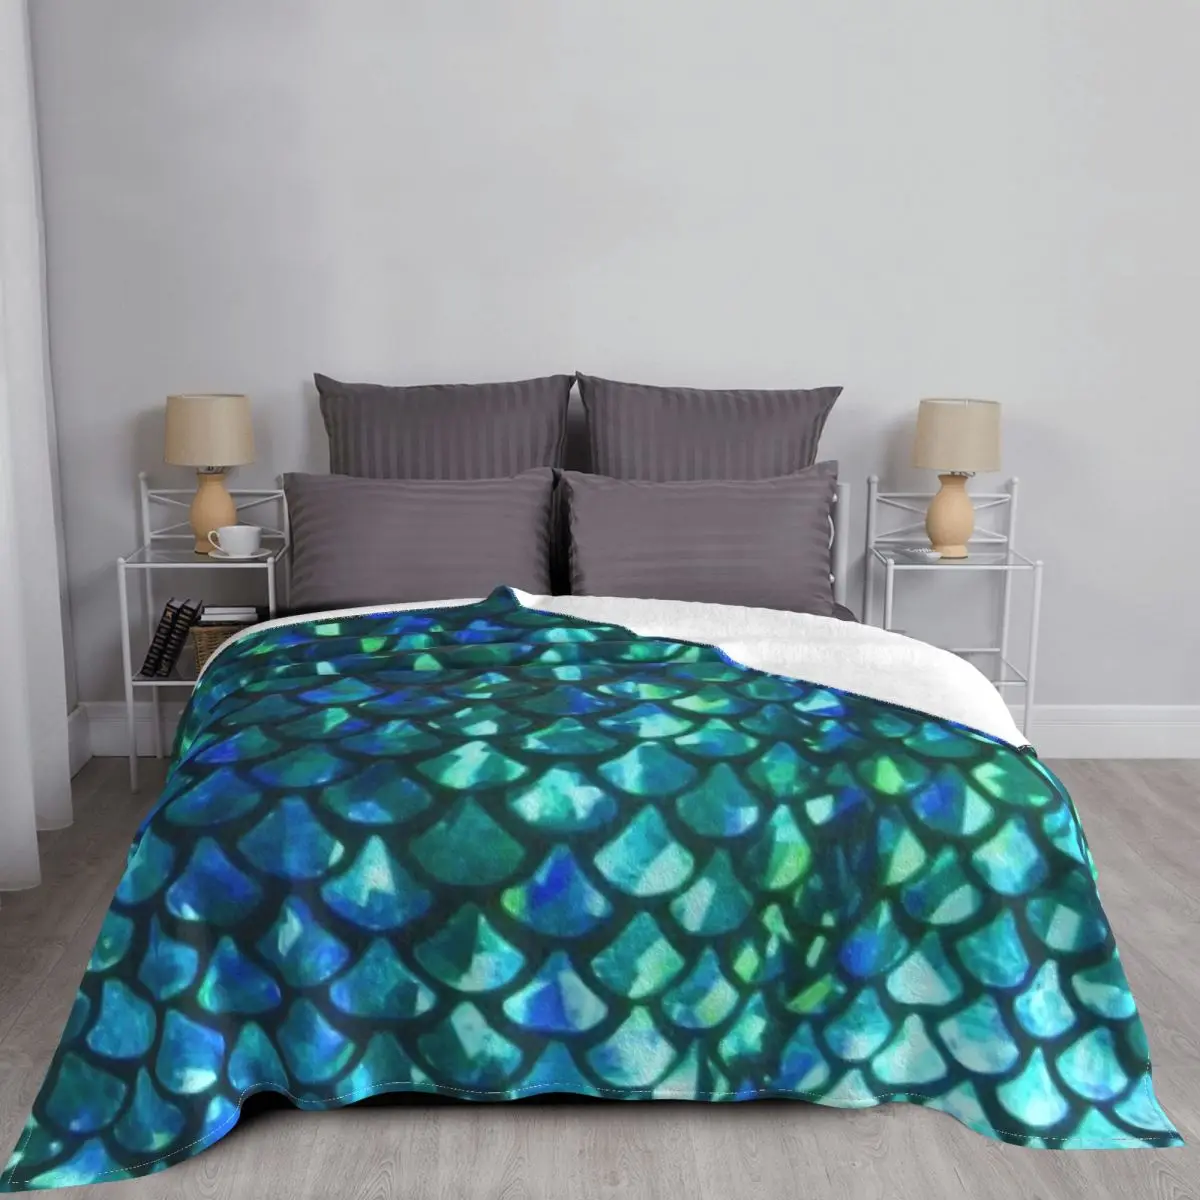 

Autumn Spring Throw Blanket Watercolor Mermaid Scales Collage Throw Fleece Flannel Throws Soft Couch Sofa Bedroom Home Decor